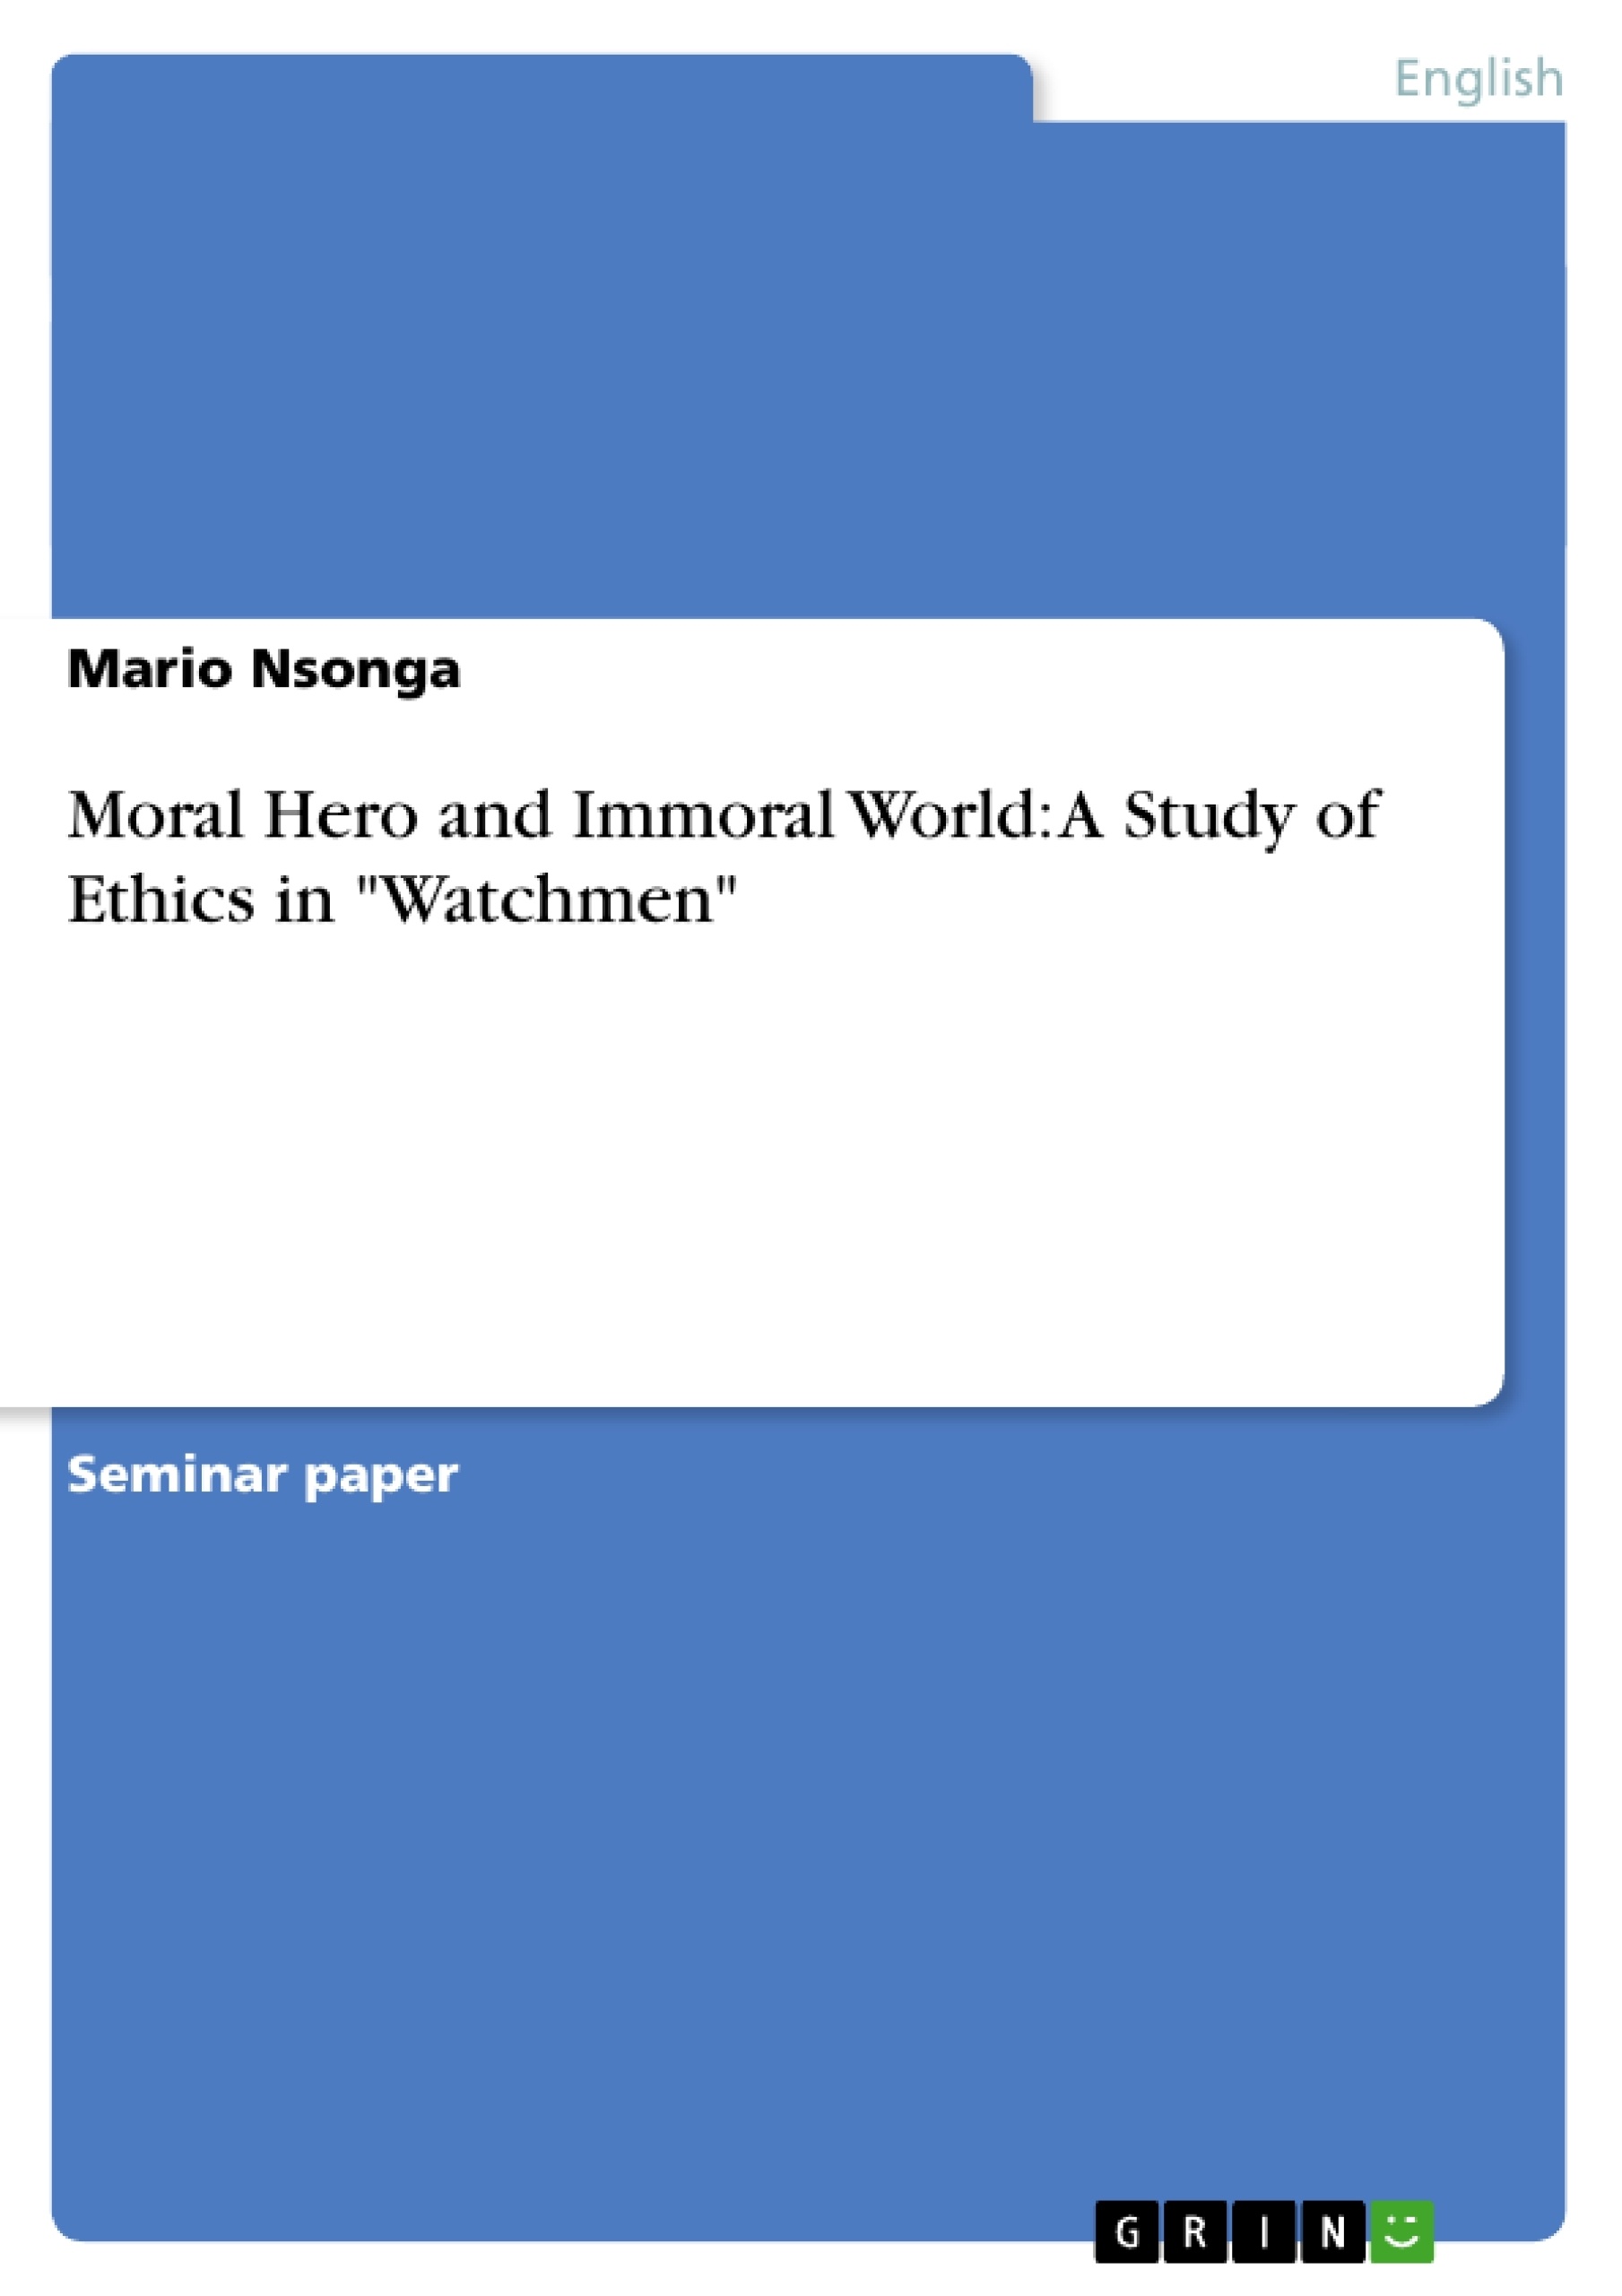 Título: Moral Hero and Immoral World: A Study of Ethics in "Watchmen"